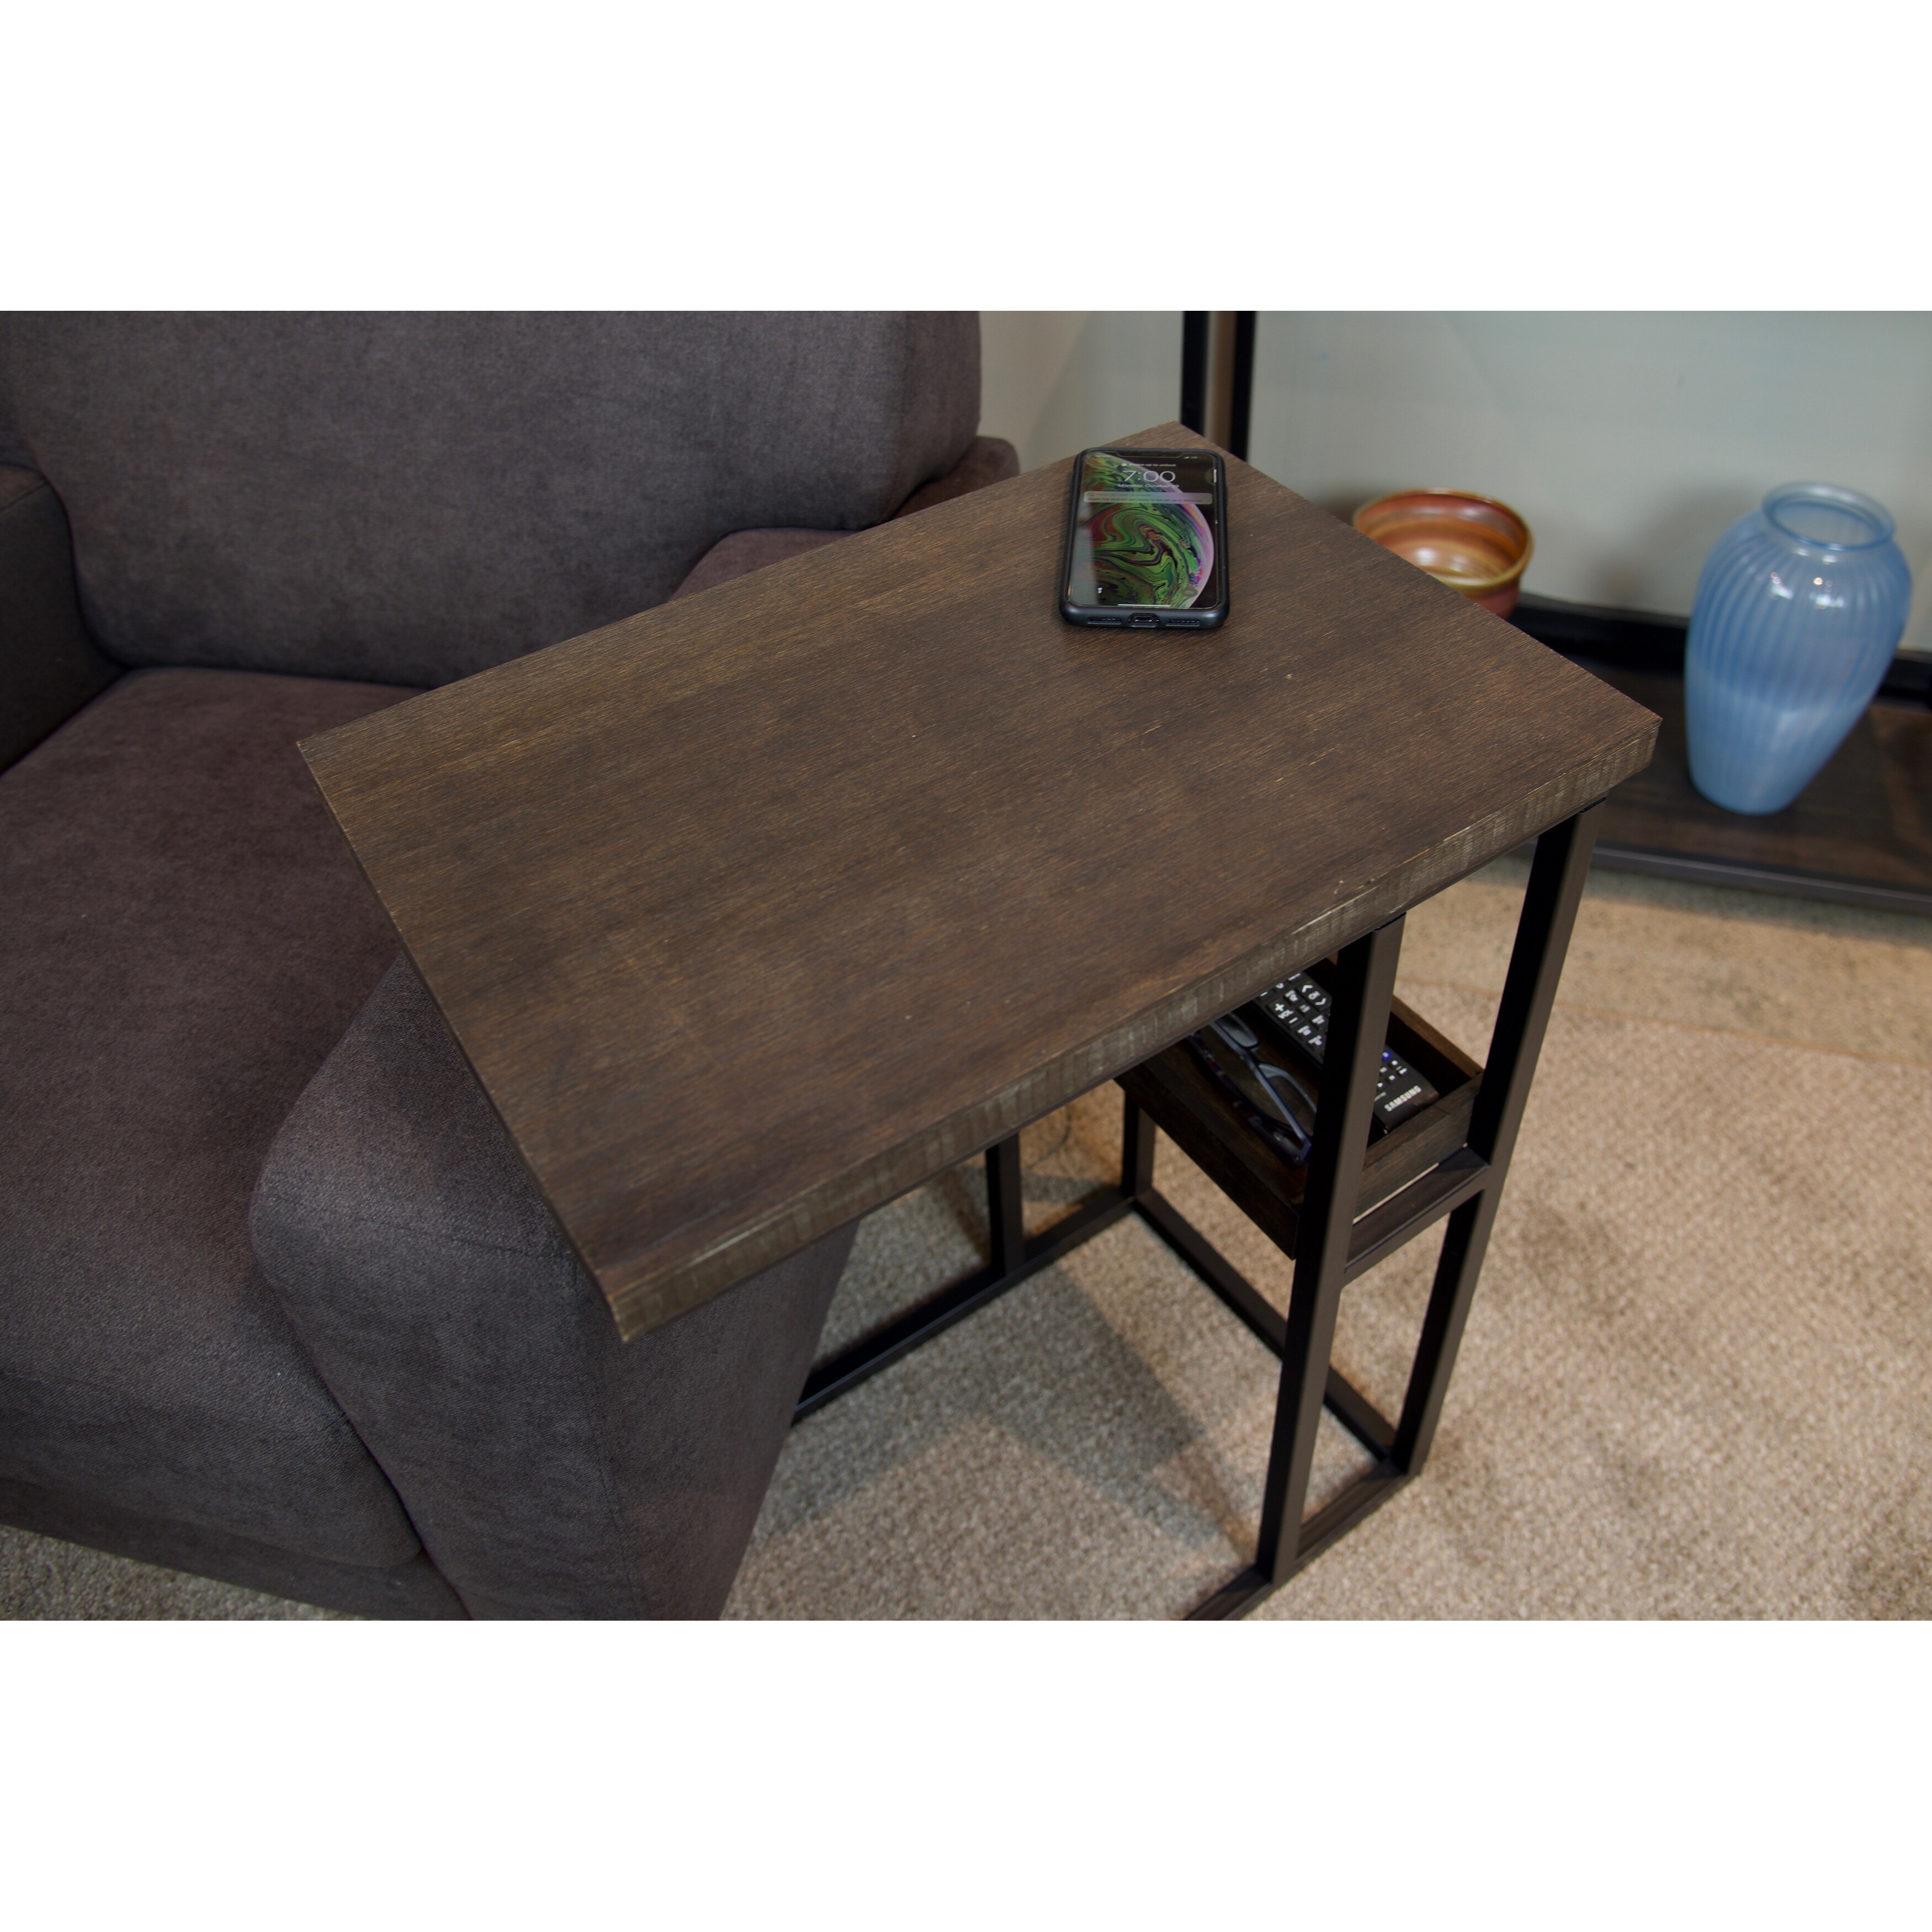 Solid Bamboo Steel Frame C-Table with Tray & Wireless USB Charger